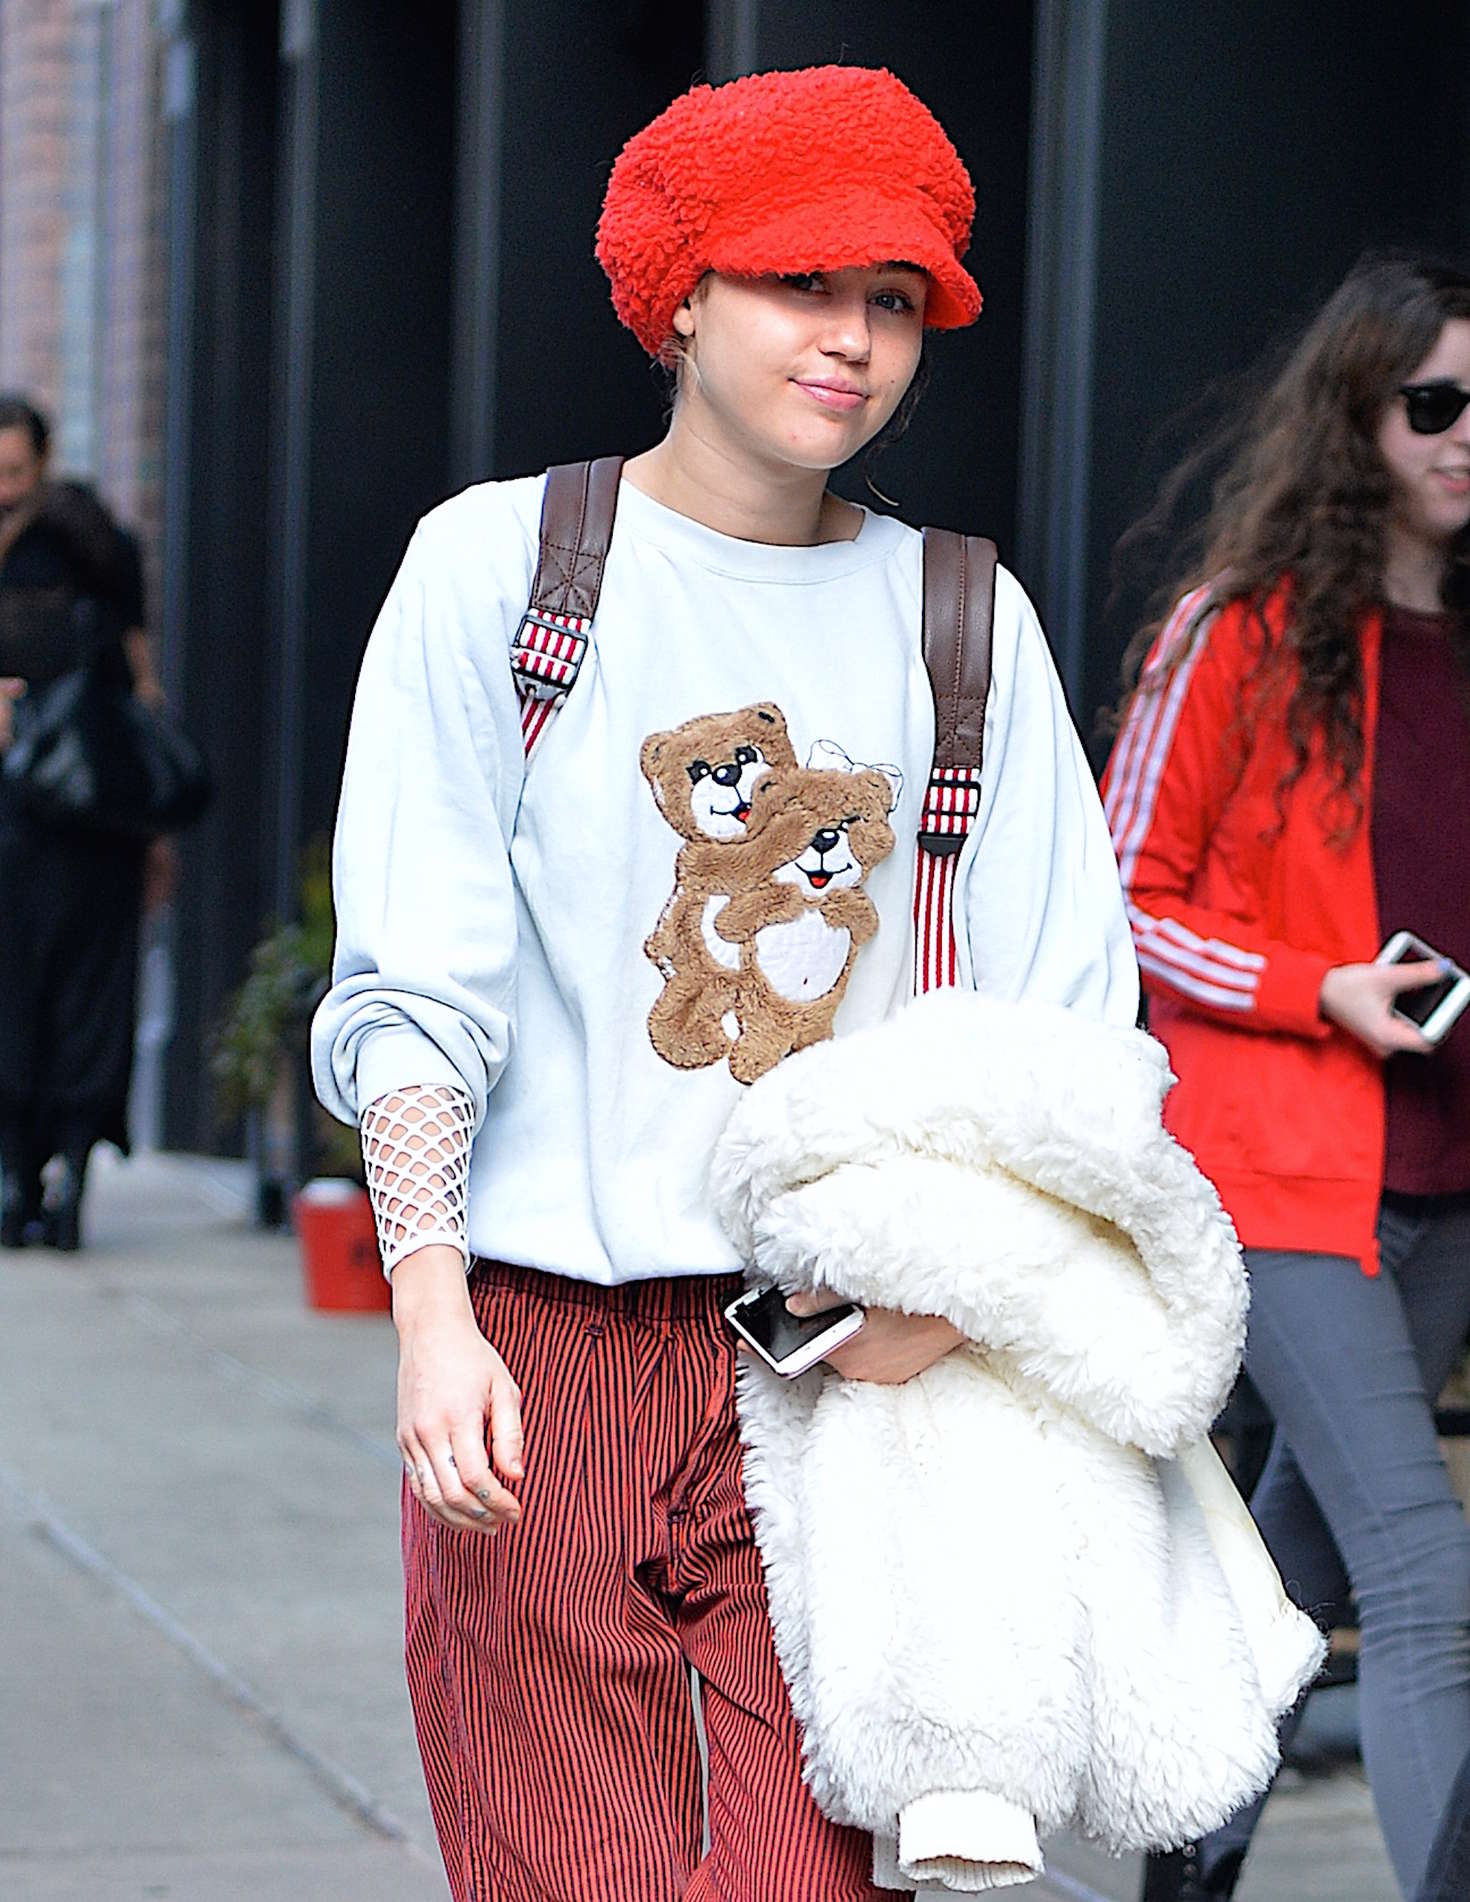 Miley Cyrus in Red Pants out and about in NYC